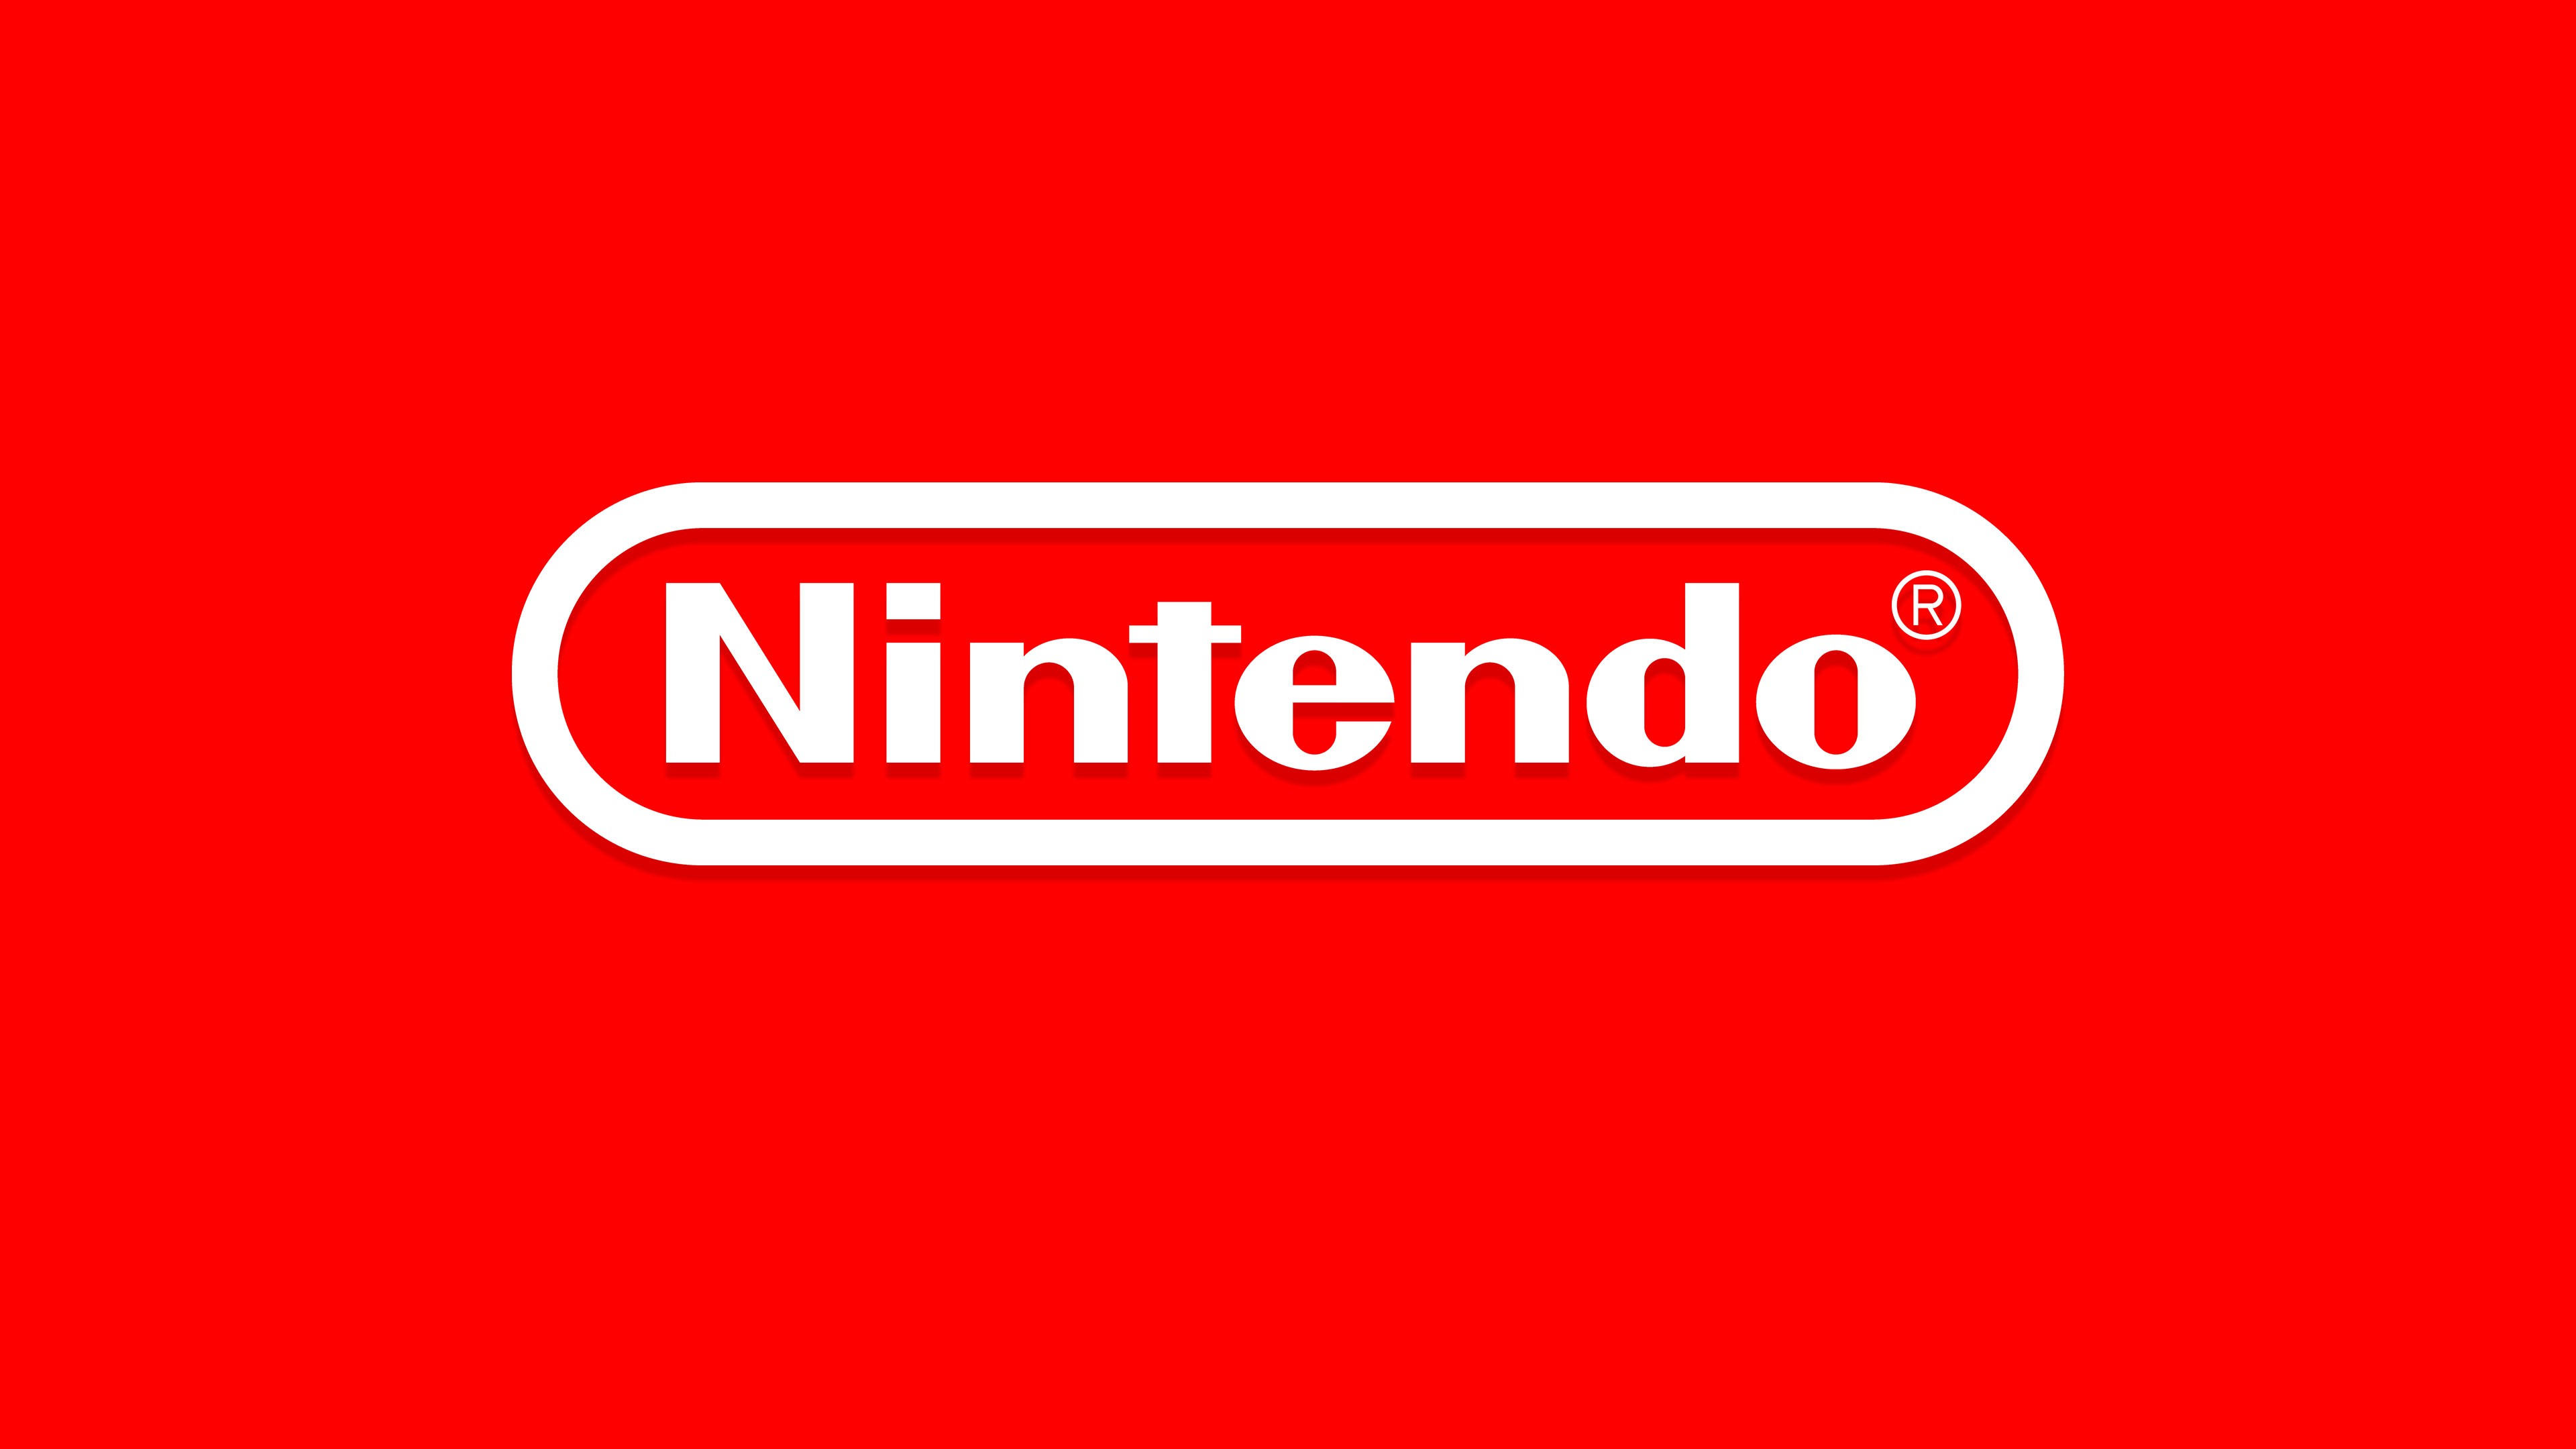 General 3840x2160 SNES brand video games Nintendo typography red background red